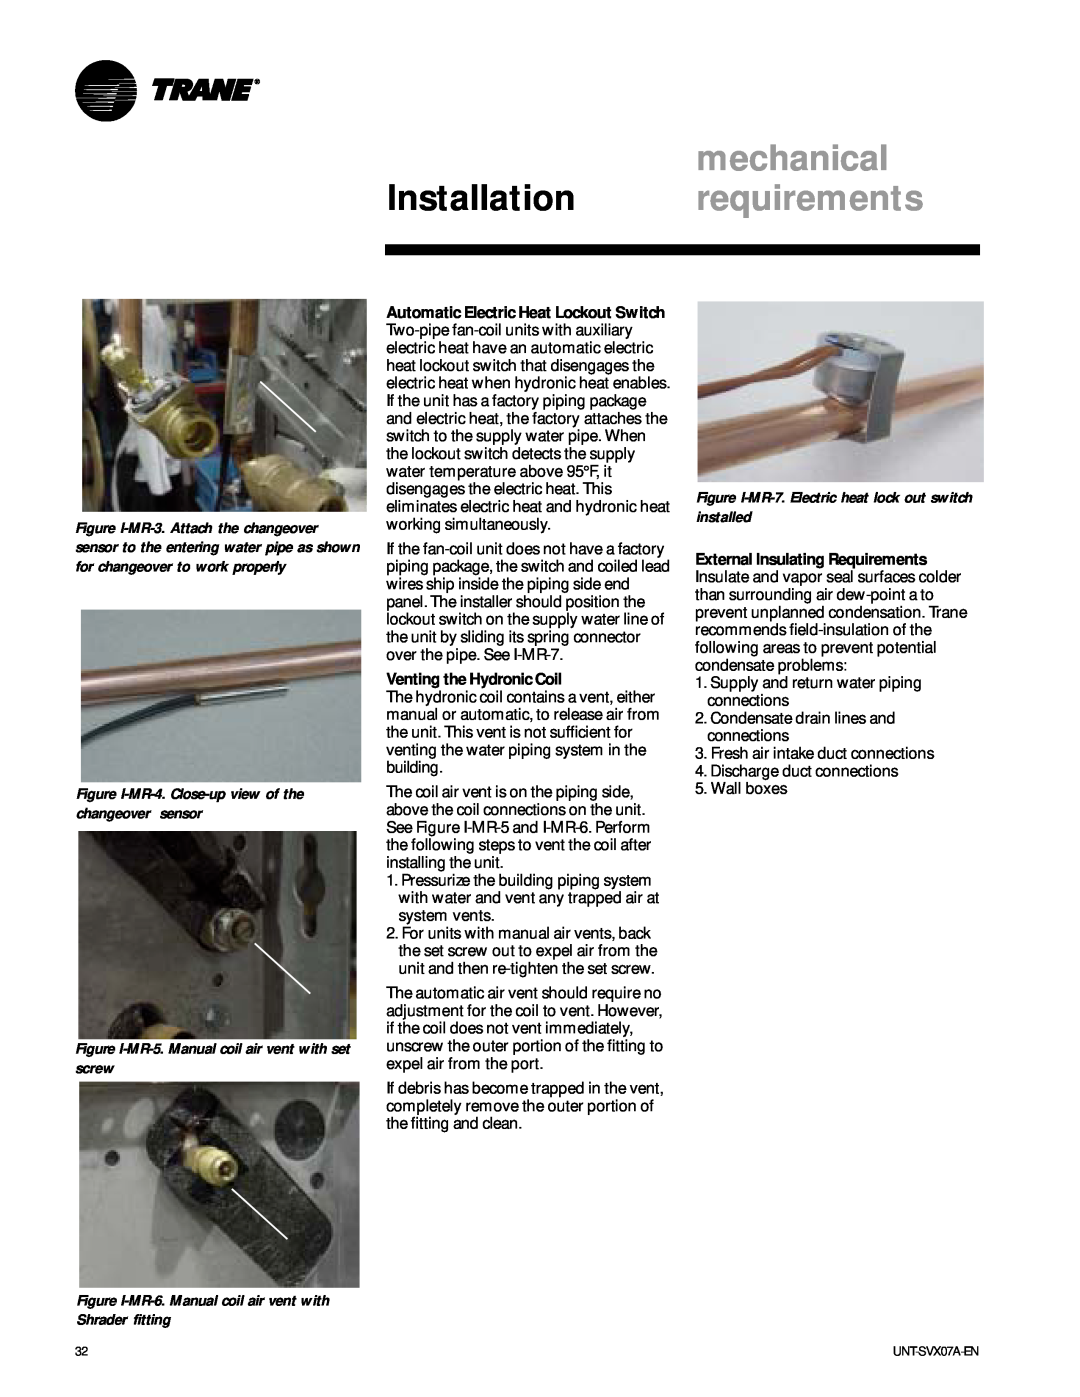 Trane UNT-SVX07A-EN manual mechanical, Installation requirements, Venting the Hydronic Coil 